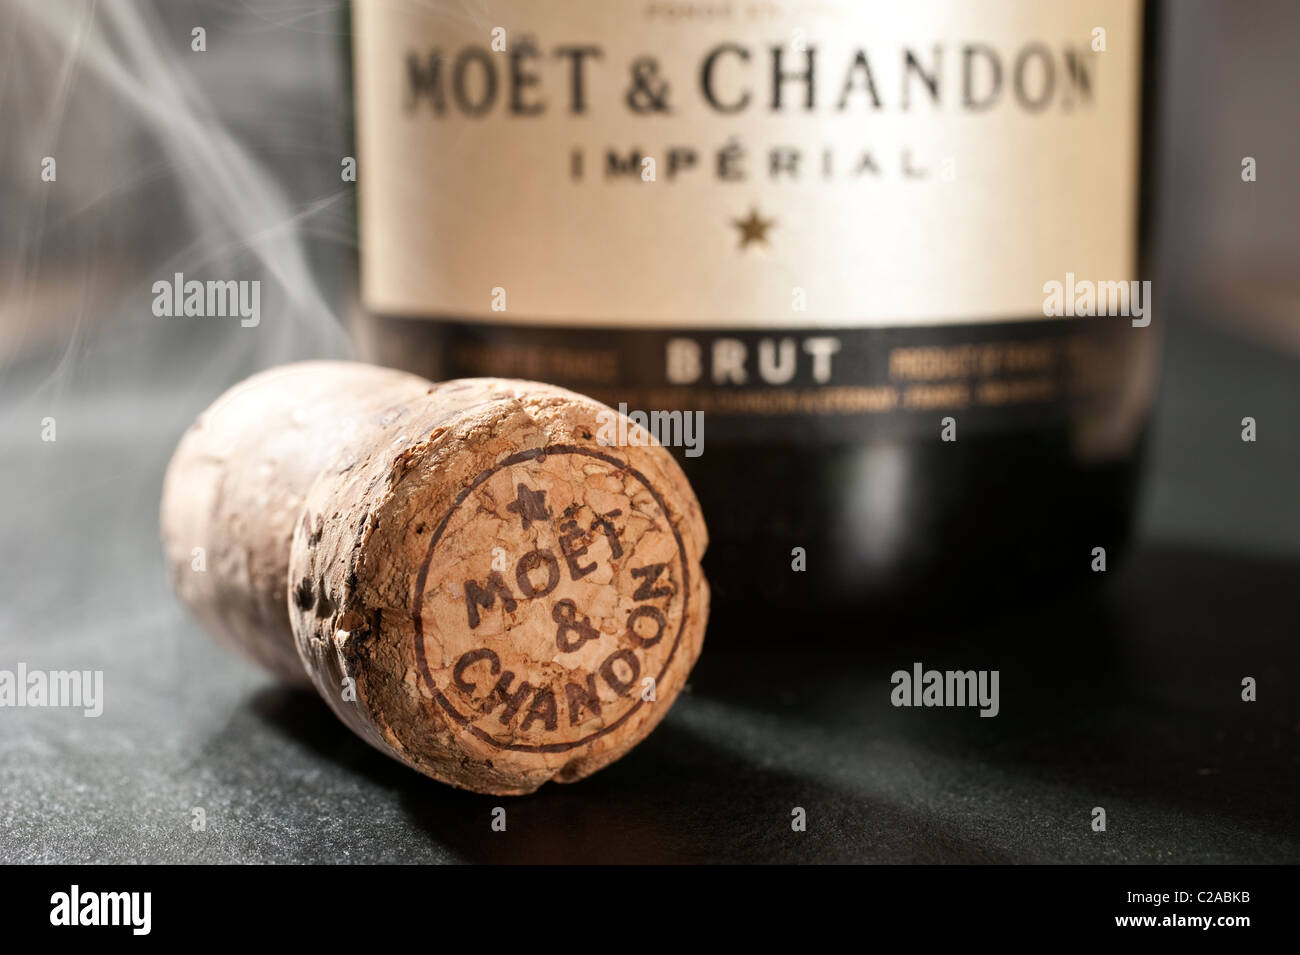 Moet logo Cut Out Stock Images & Pictures - Alamy